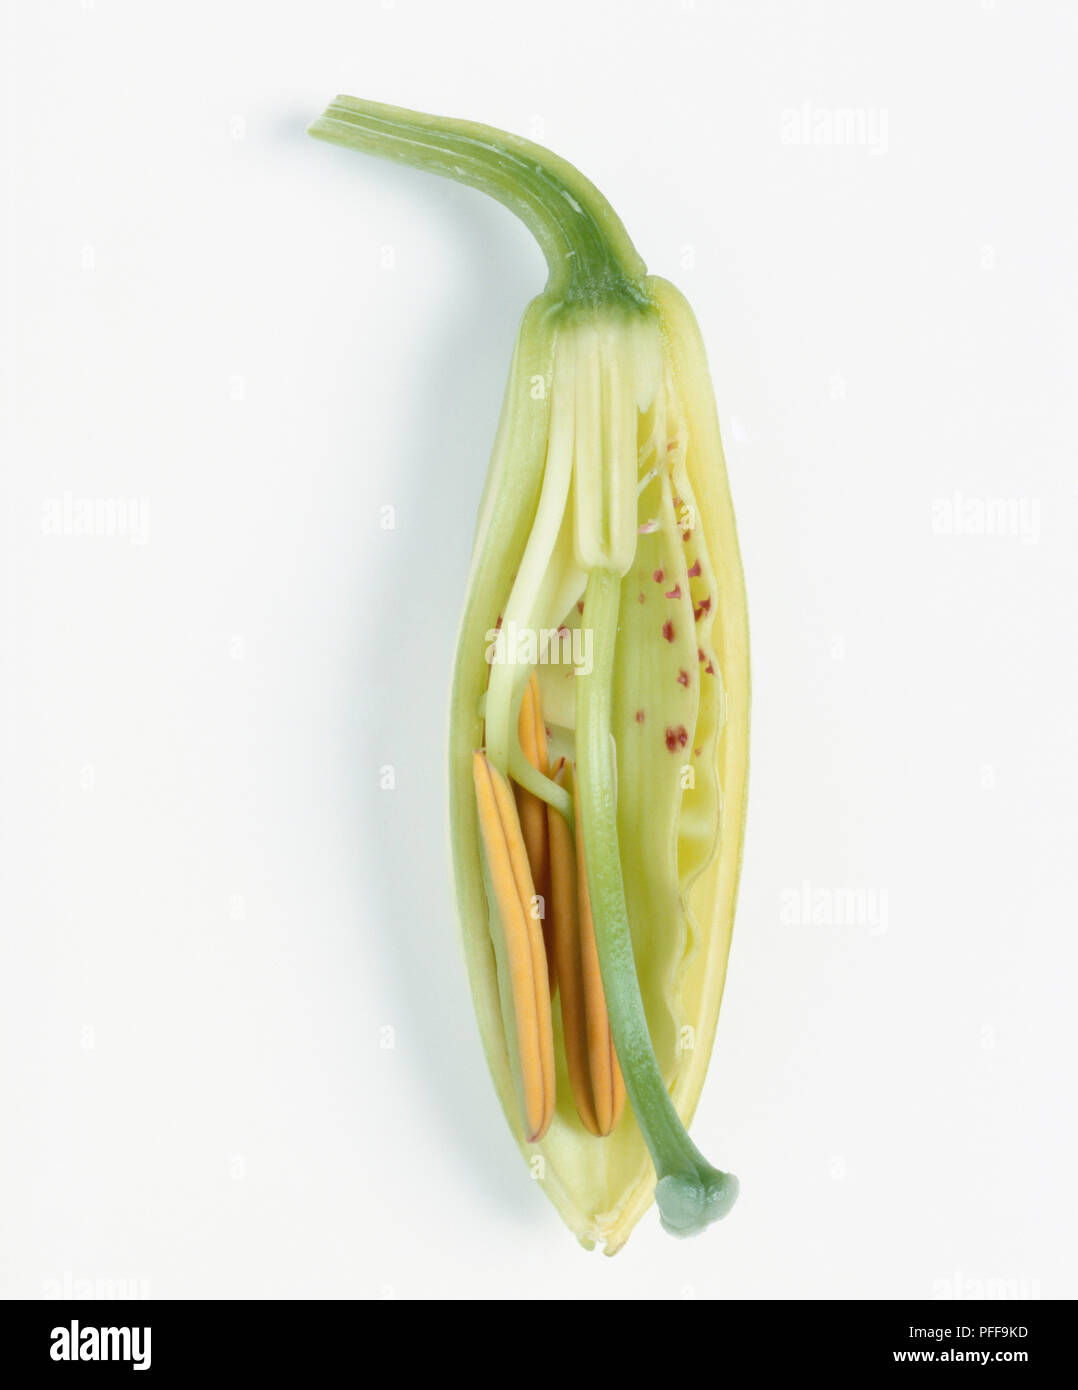 Lily flower bud, cross-section, close-up Stock Photo